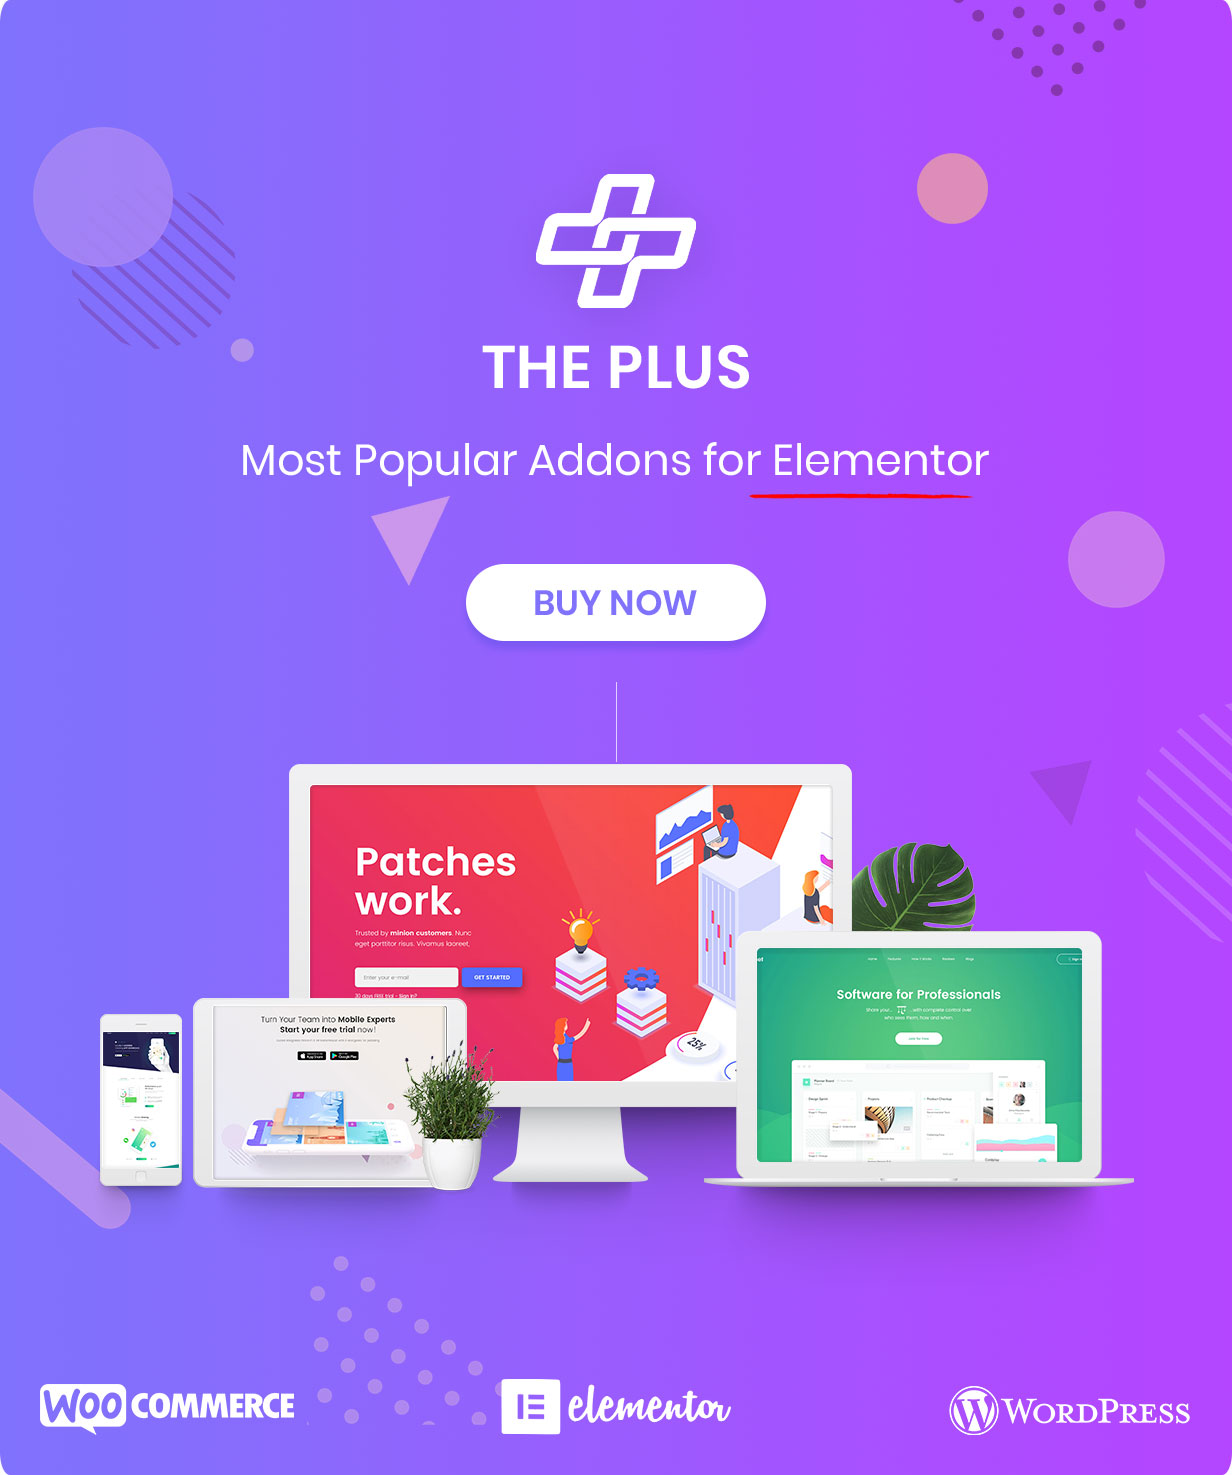 Biggest and most Innovative addons for Elementor Page Builder. Awarded as Best Elementor Addons by Industry leaders. Top class 60+ Elementor Widgets, 18+ Elementor Page Demos, and 300+ UI Blocks made in elementor.